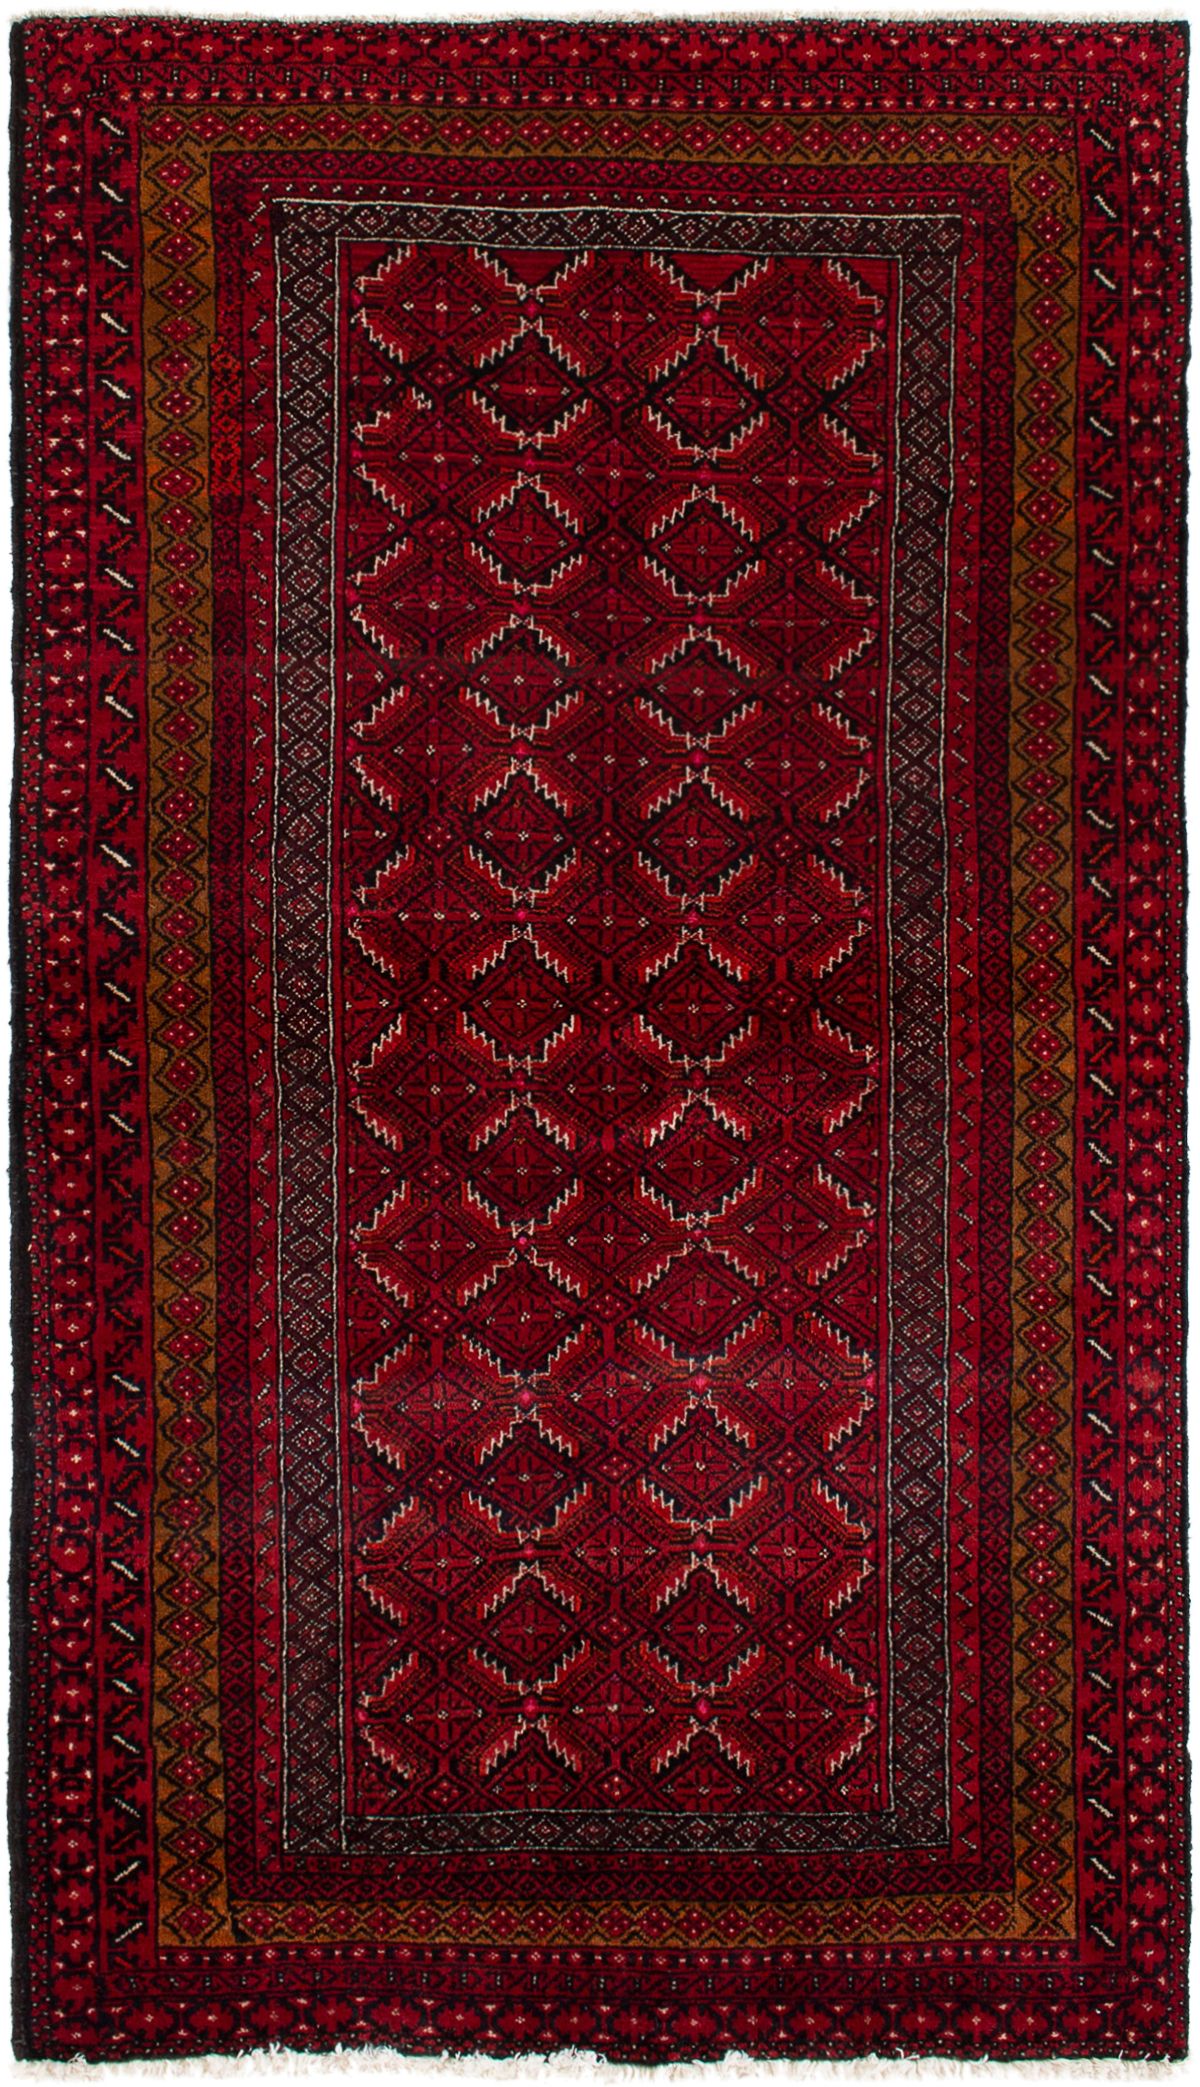 Hand-knotted Finest Baluch  Wool Rug 3'6" x 6'4"  Size: 3'6" x 6'4"  